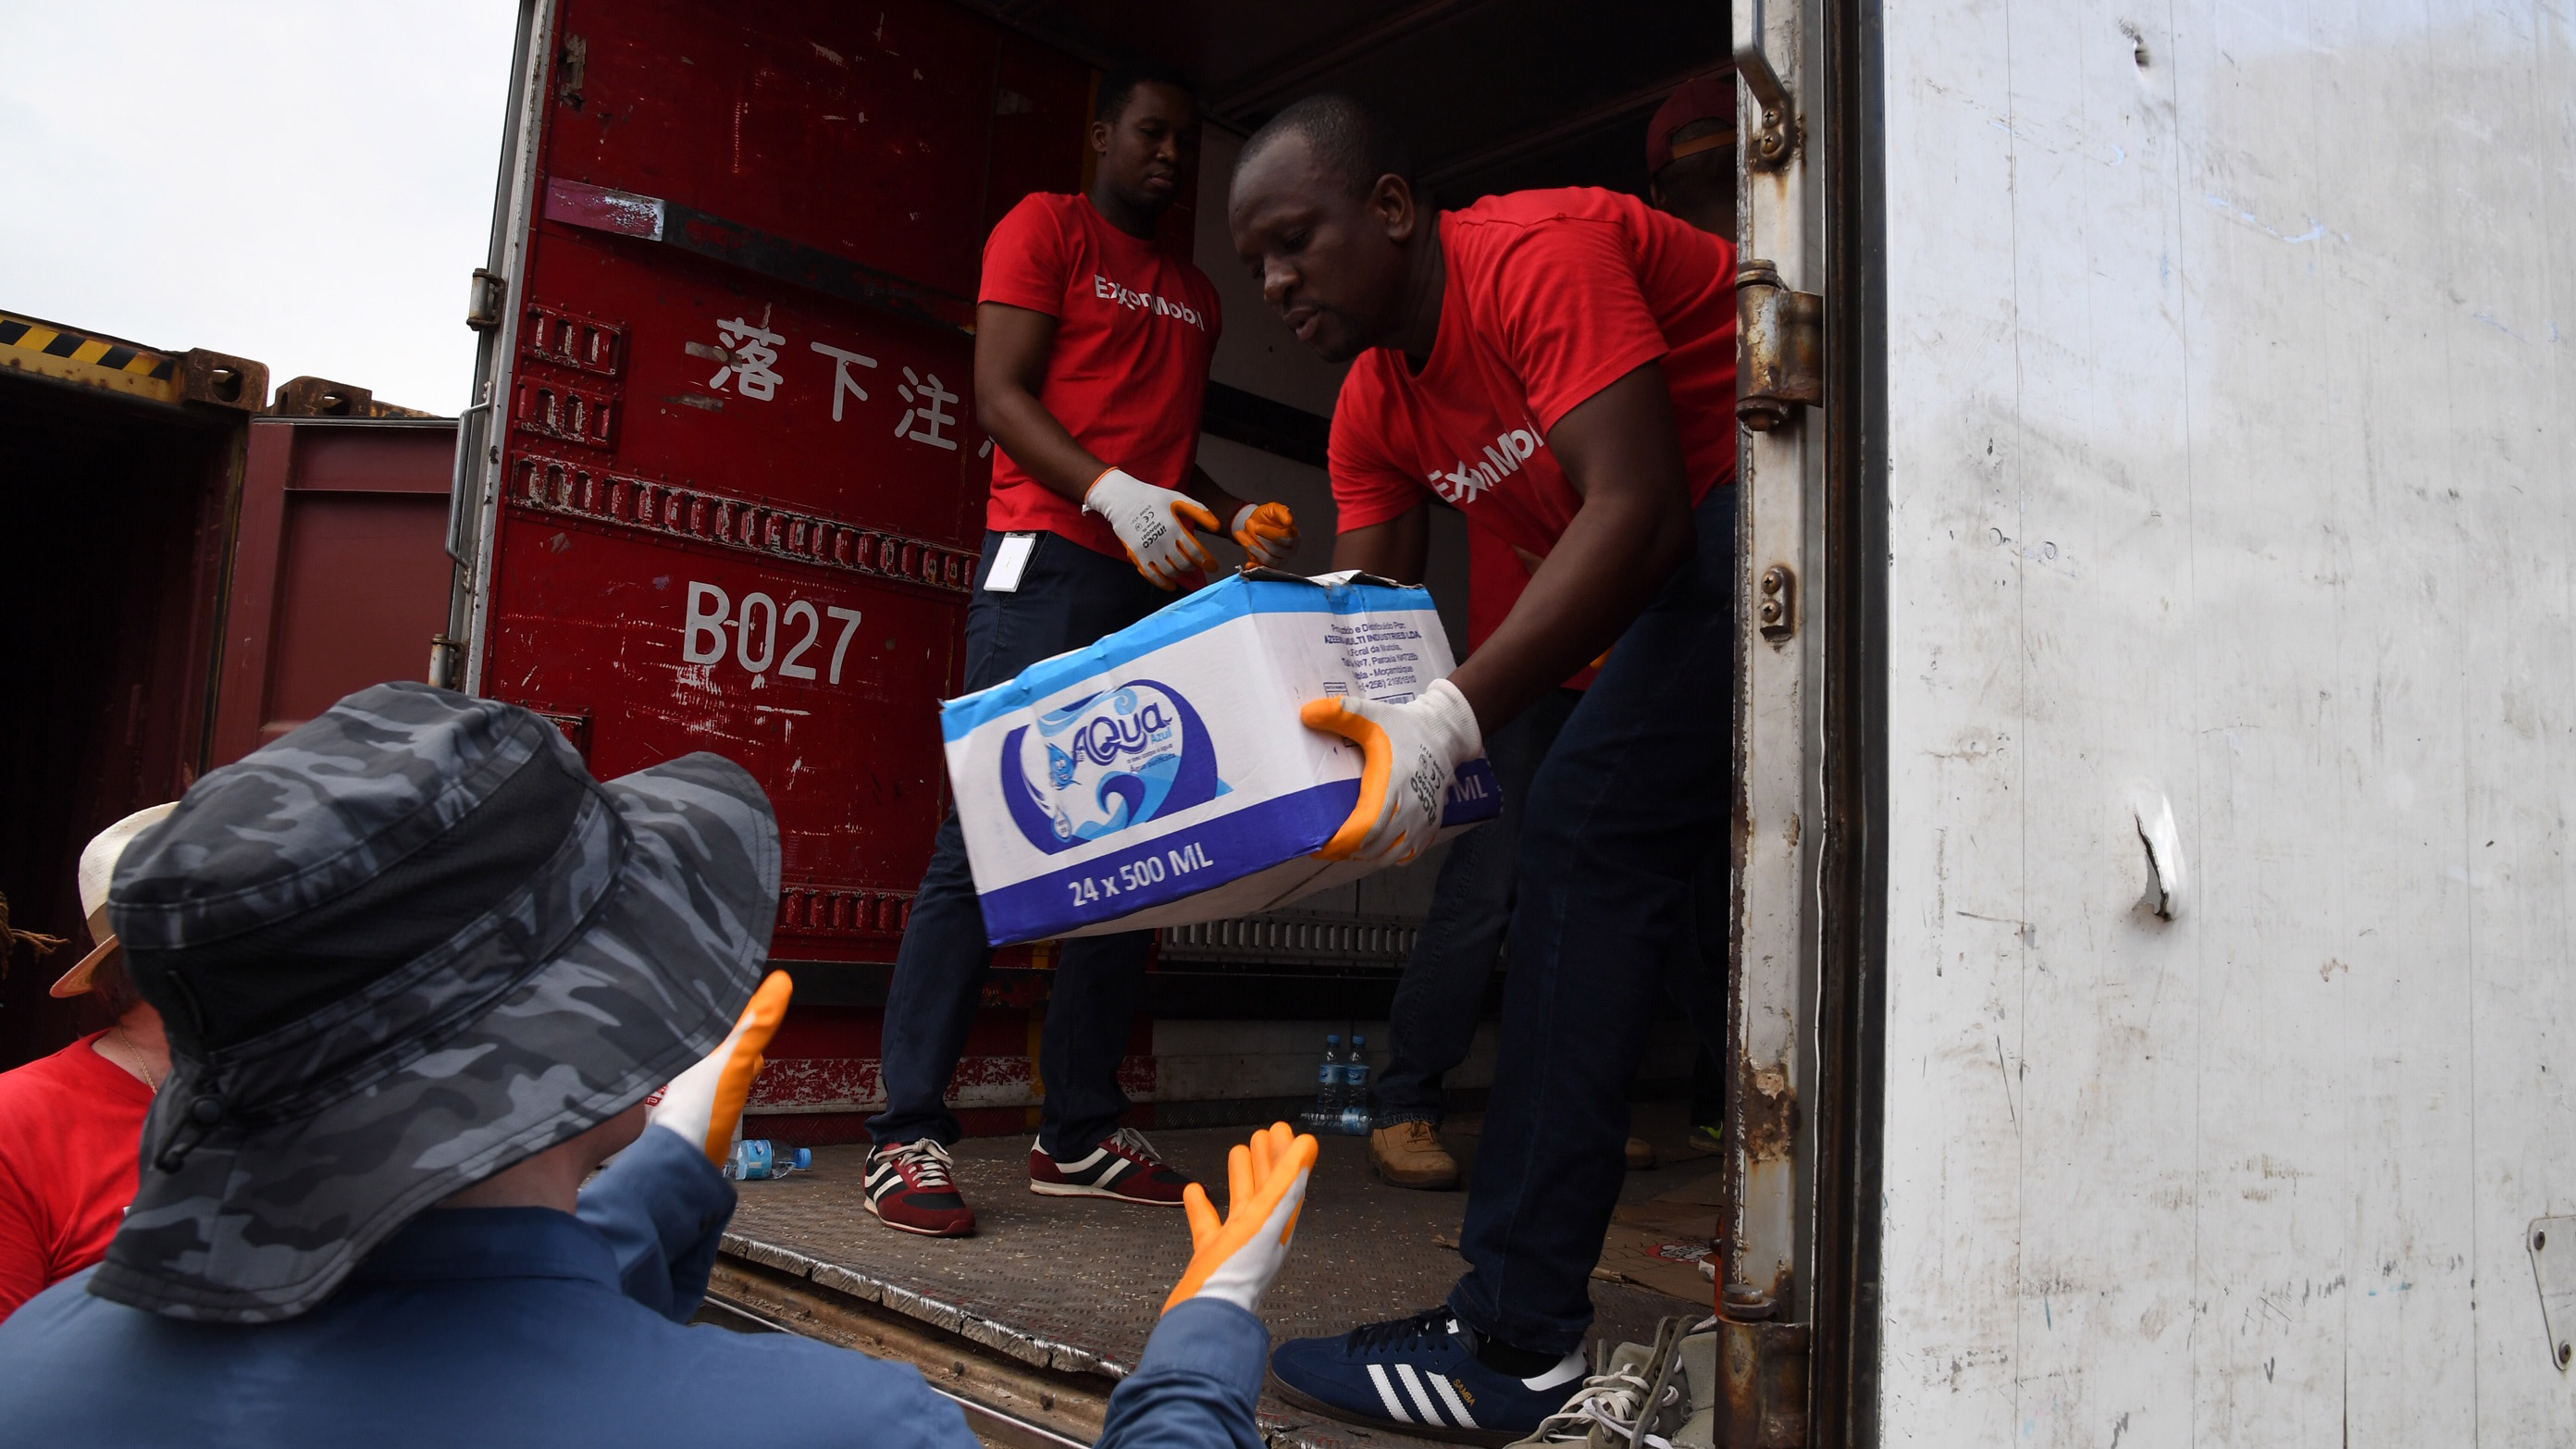 Image Photo – ExxonMobil Mozambique employees assisting in relief efforts following Cyclone Idai.